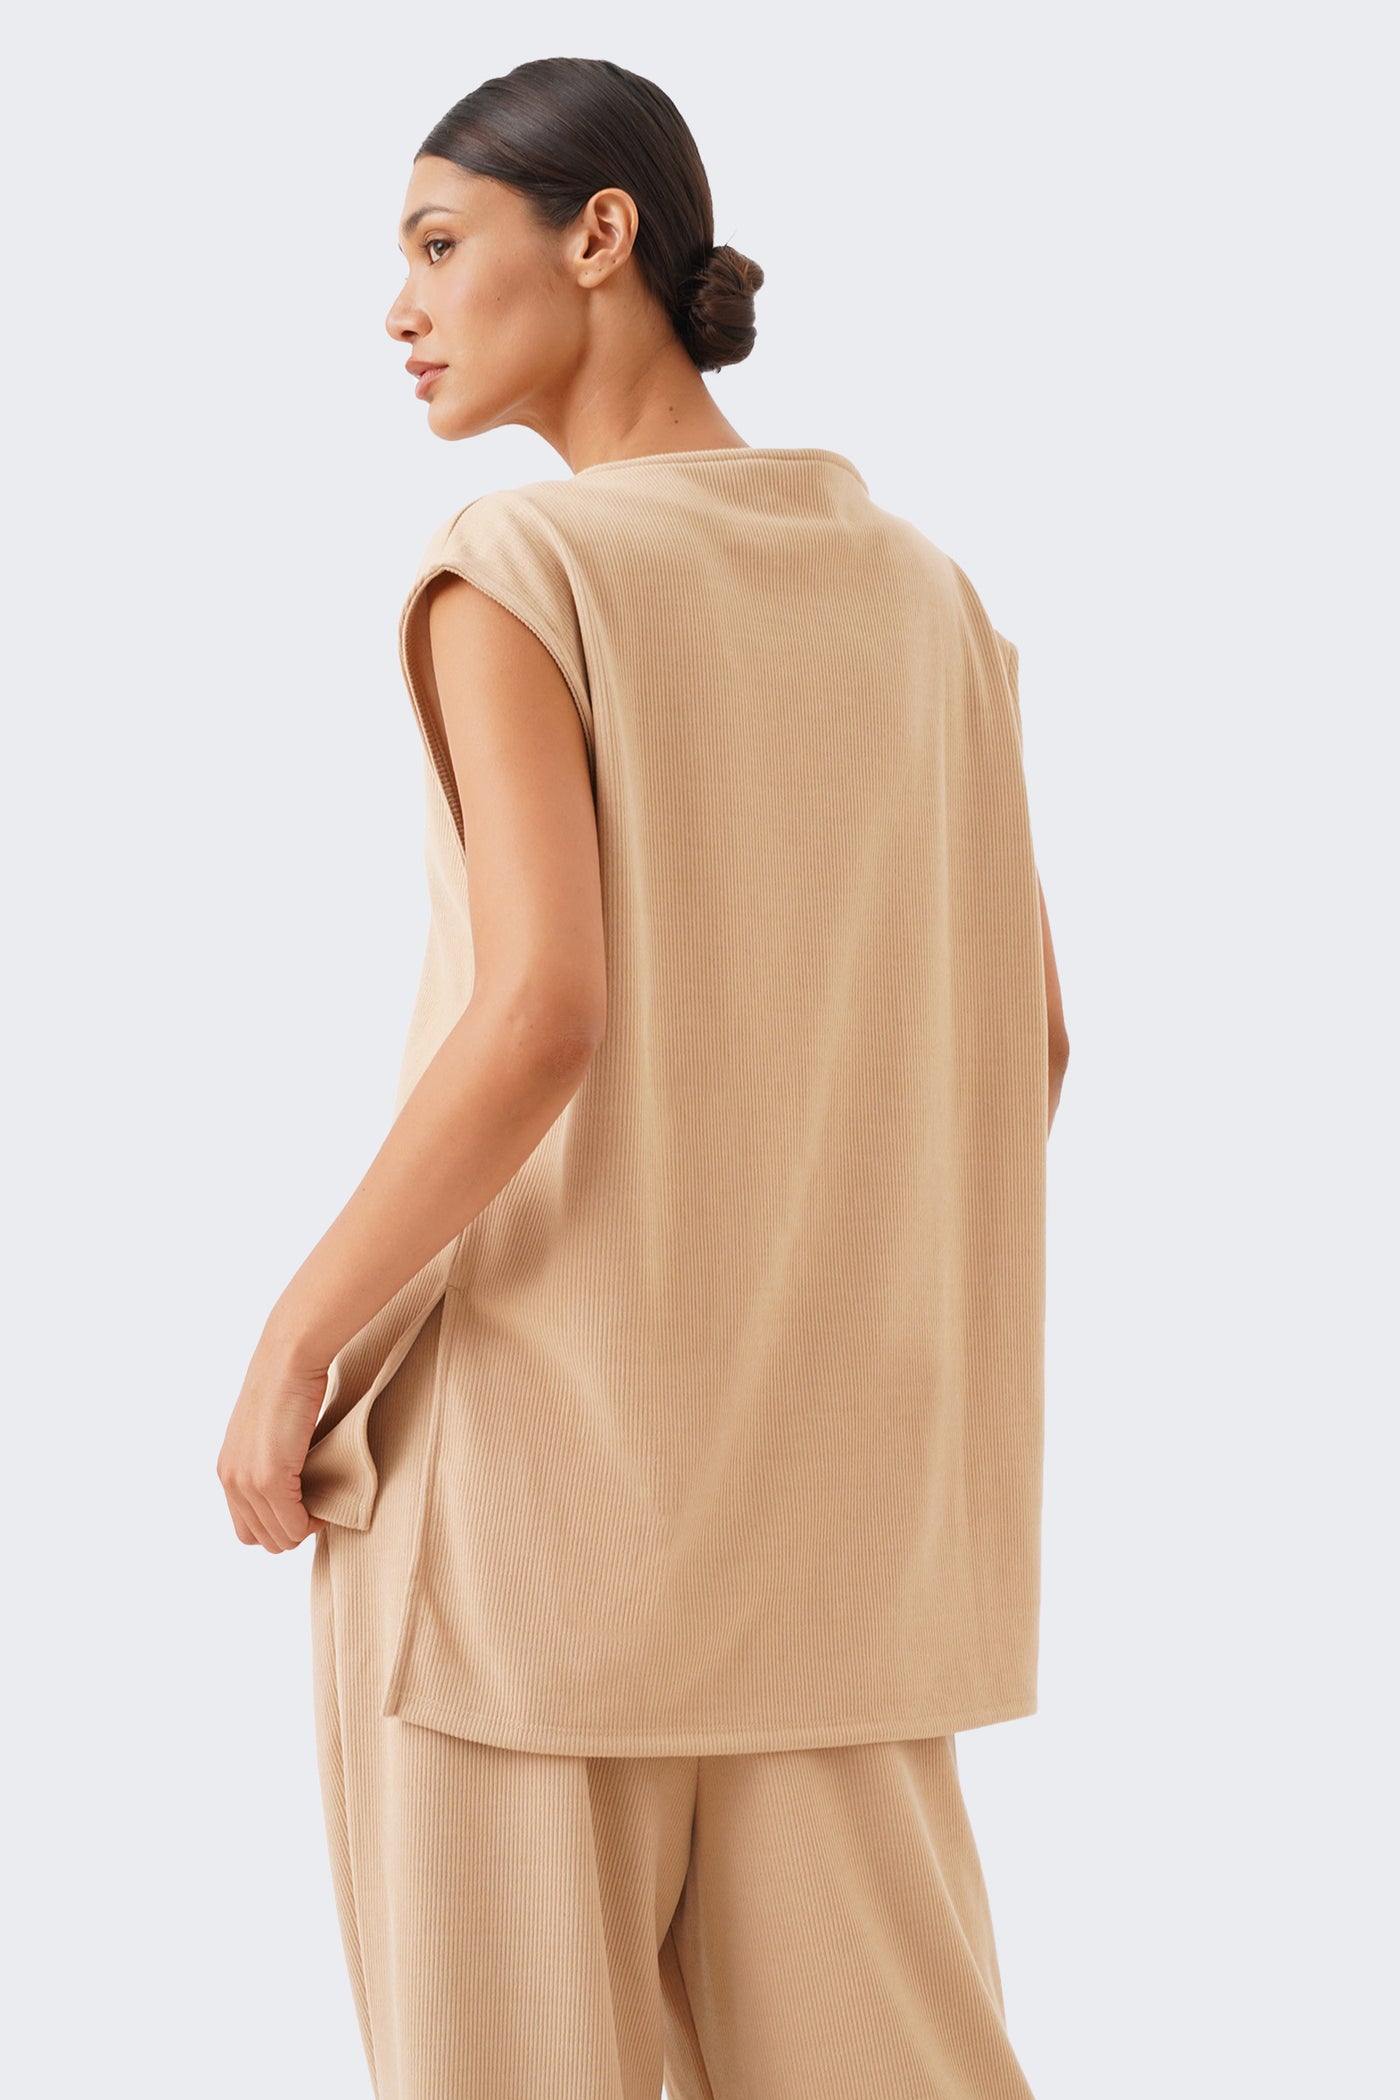 Women's Sleeveless Ribbed Tunic with Self Tie